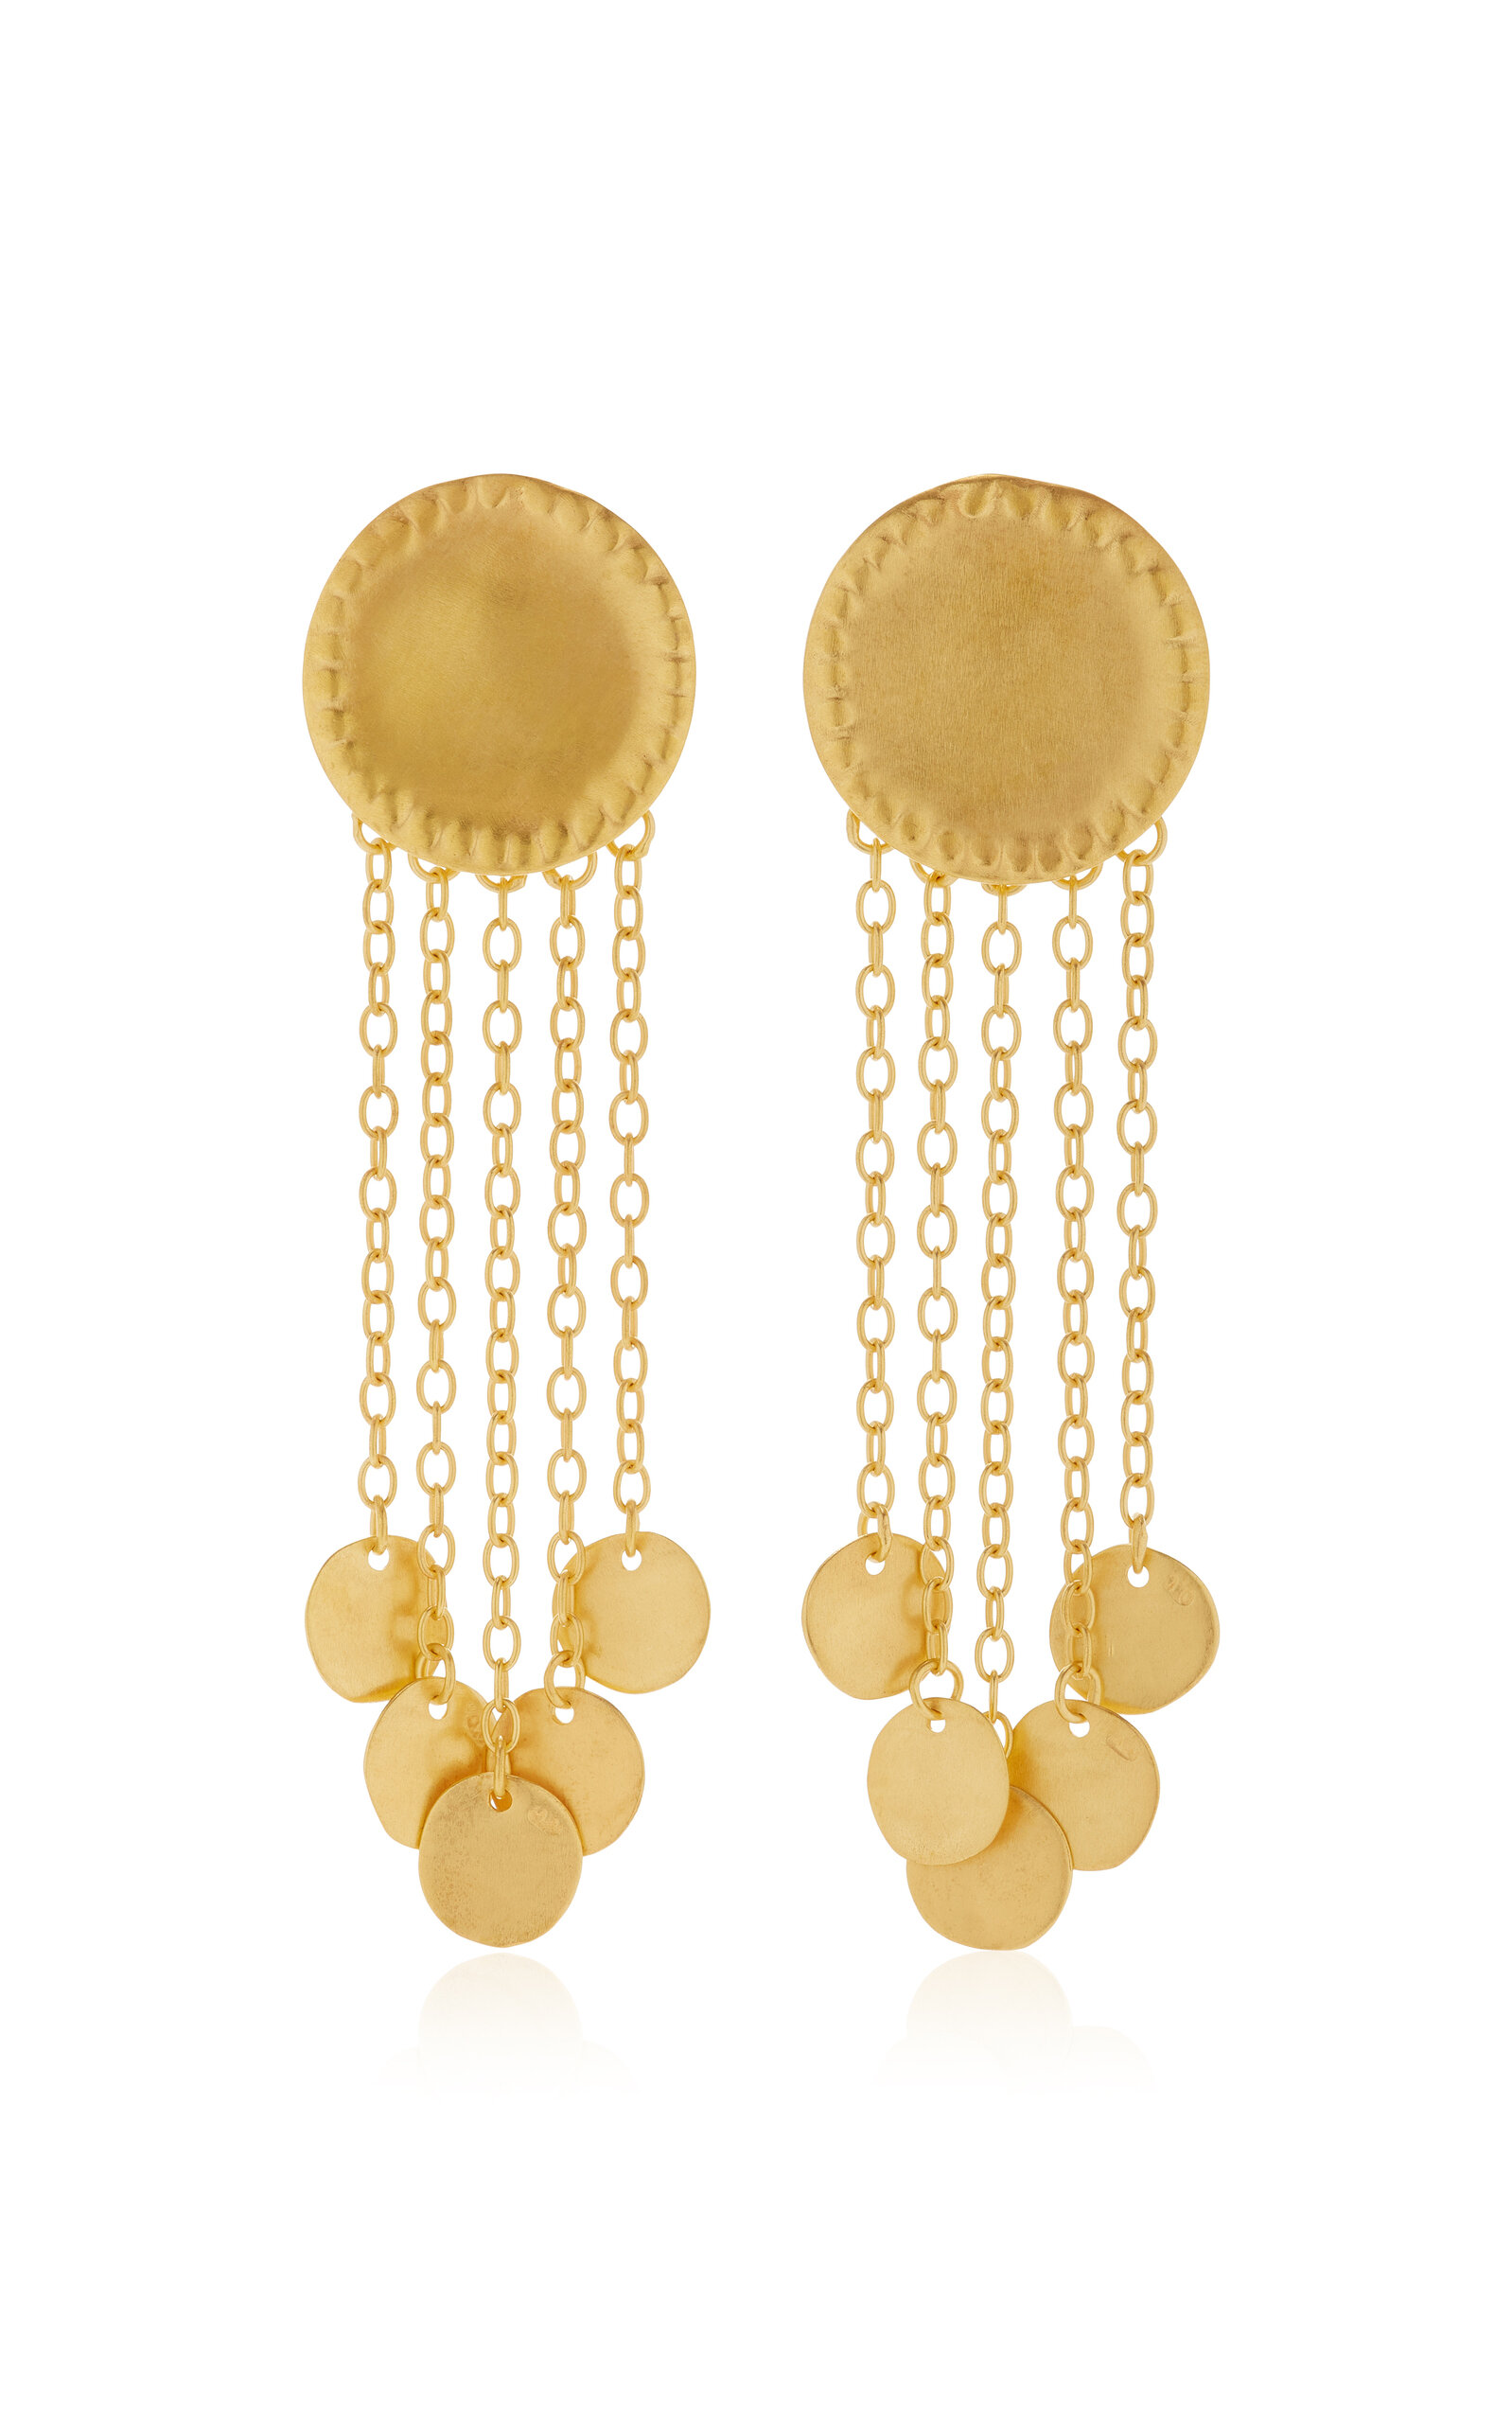 Cano Puinave 24k Gold-plated Earrings